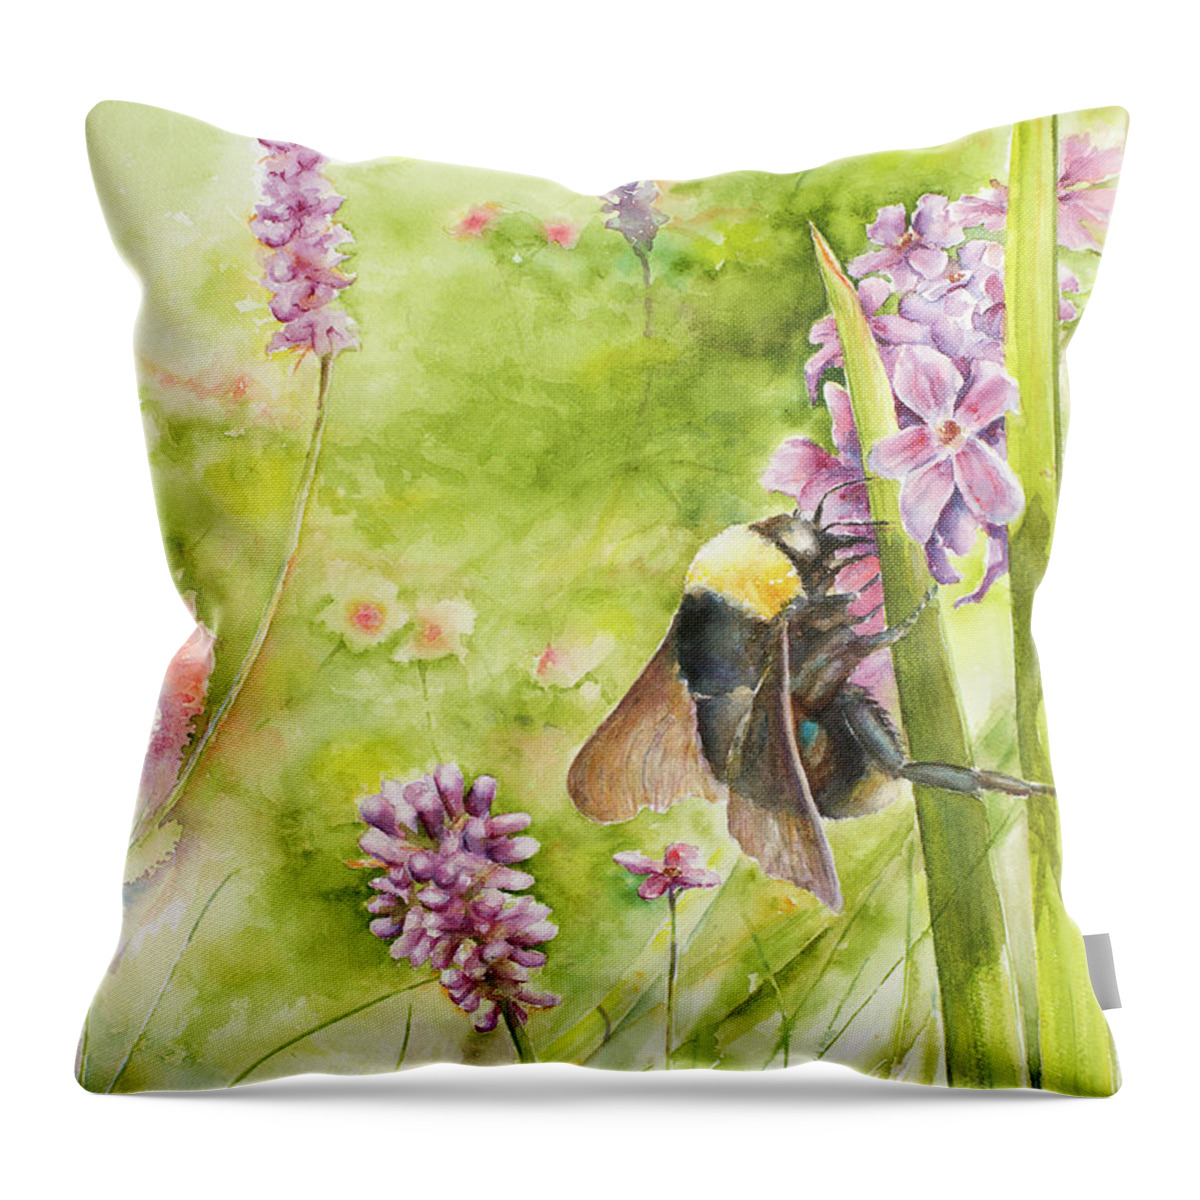 Landscape Throw Pillow featuring the painting Bumble by Arthur Fix